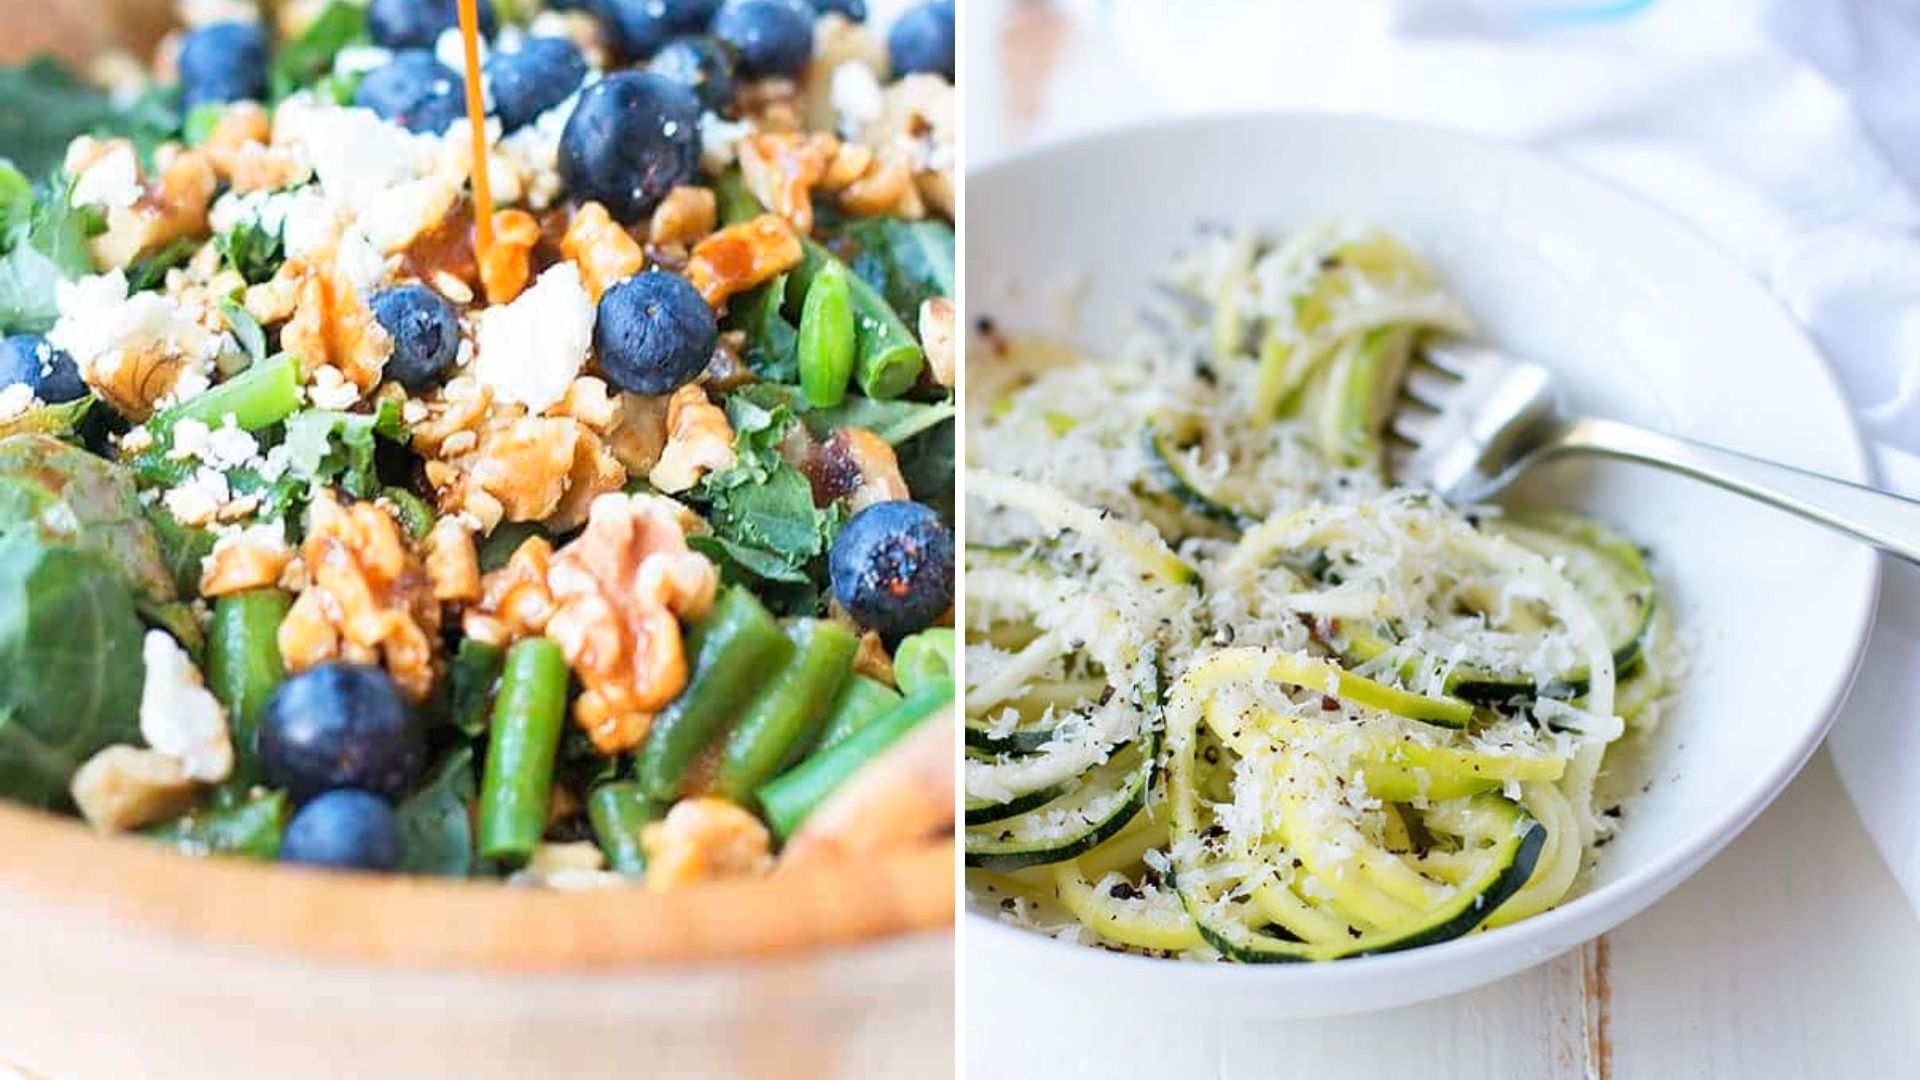 Two images side by side: Kale salad with blueberries, walnuts, and feta and zoodles.